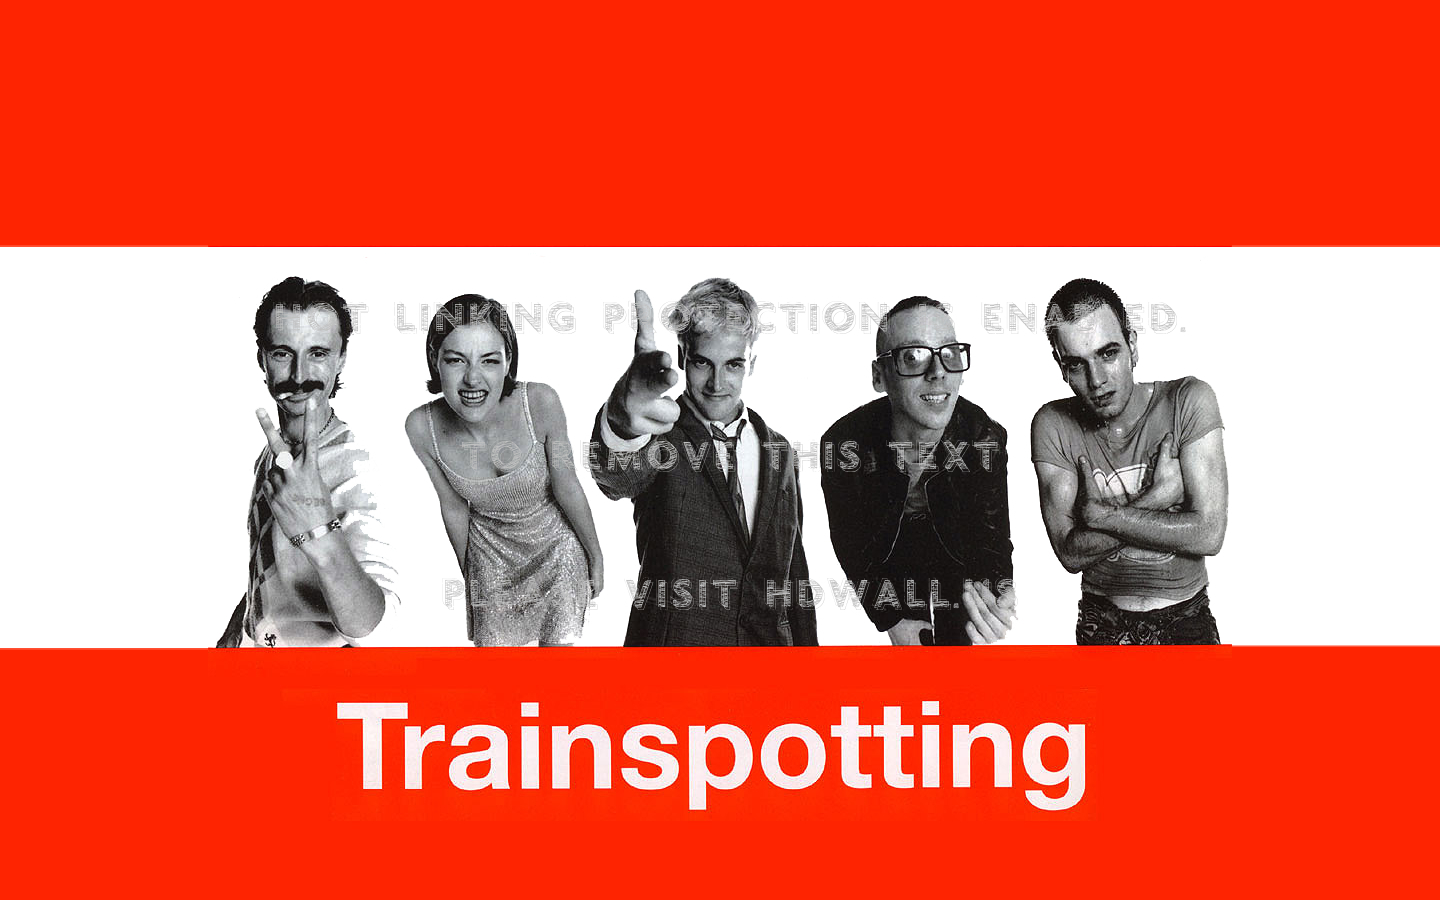 trainspotting wallpaper,people,social group,text,facial expression,font